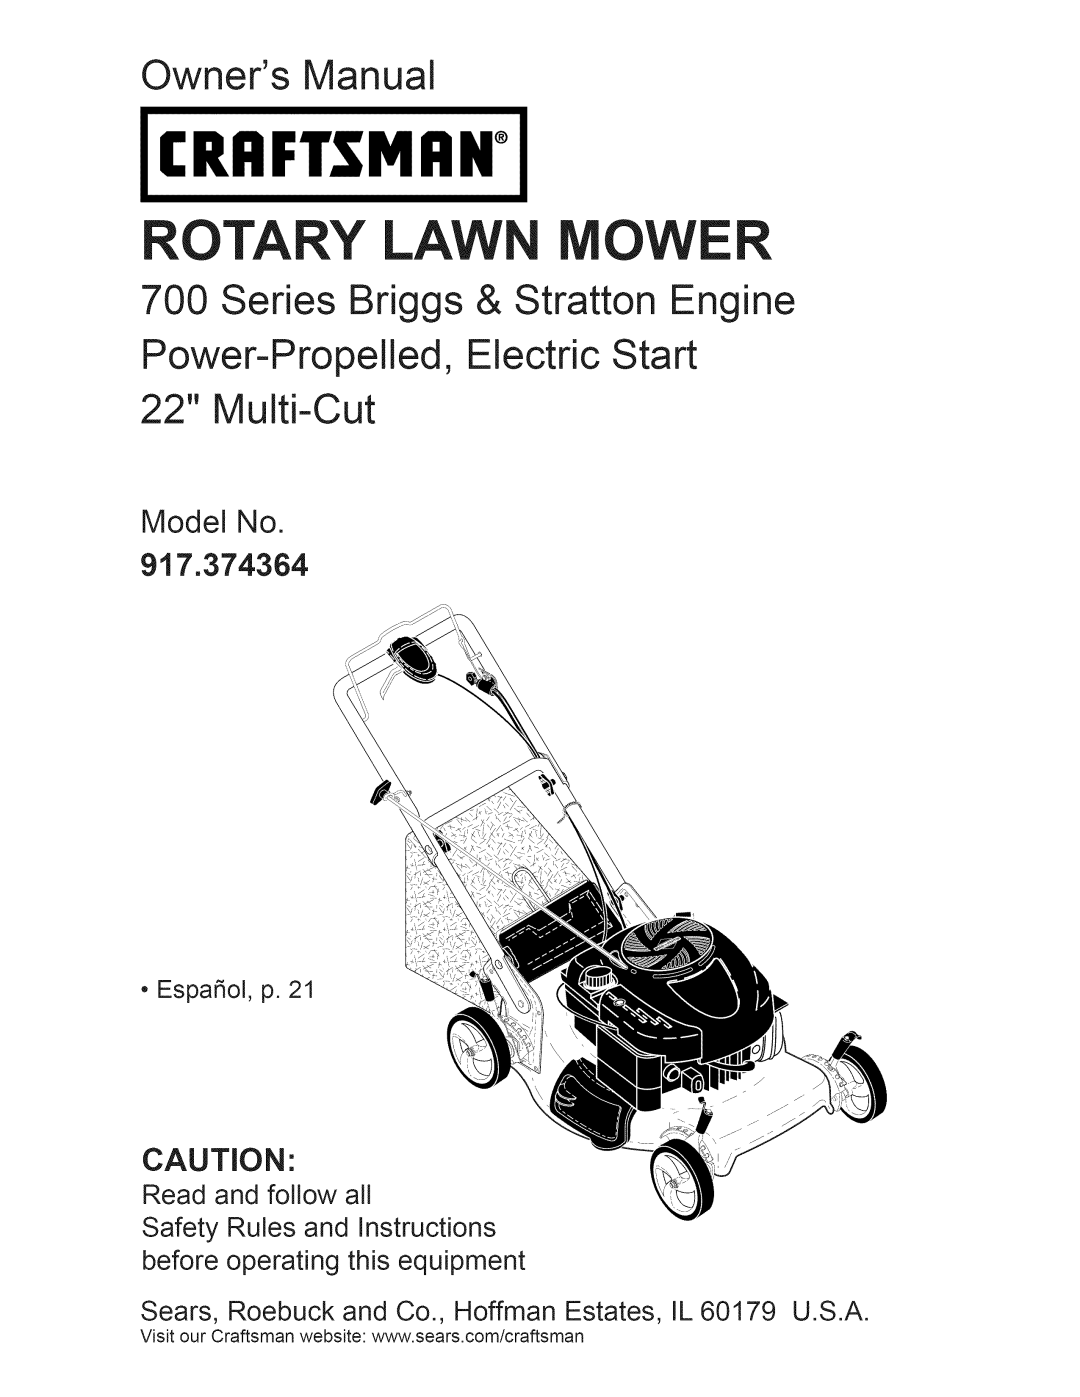 Craftsman manual Model No 917.374364, Craftsman, Rotary Lawn Mower, Owners Manual, Series Briggs & Stratton Engine 